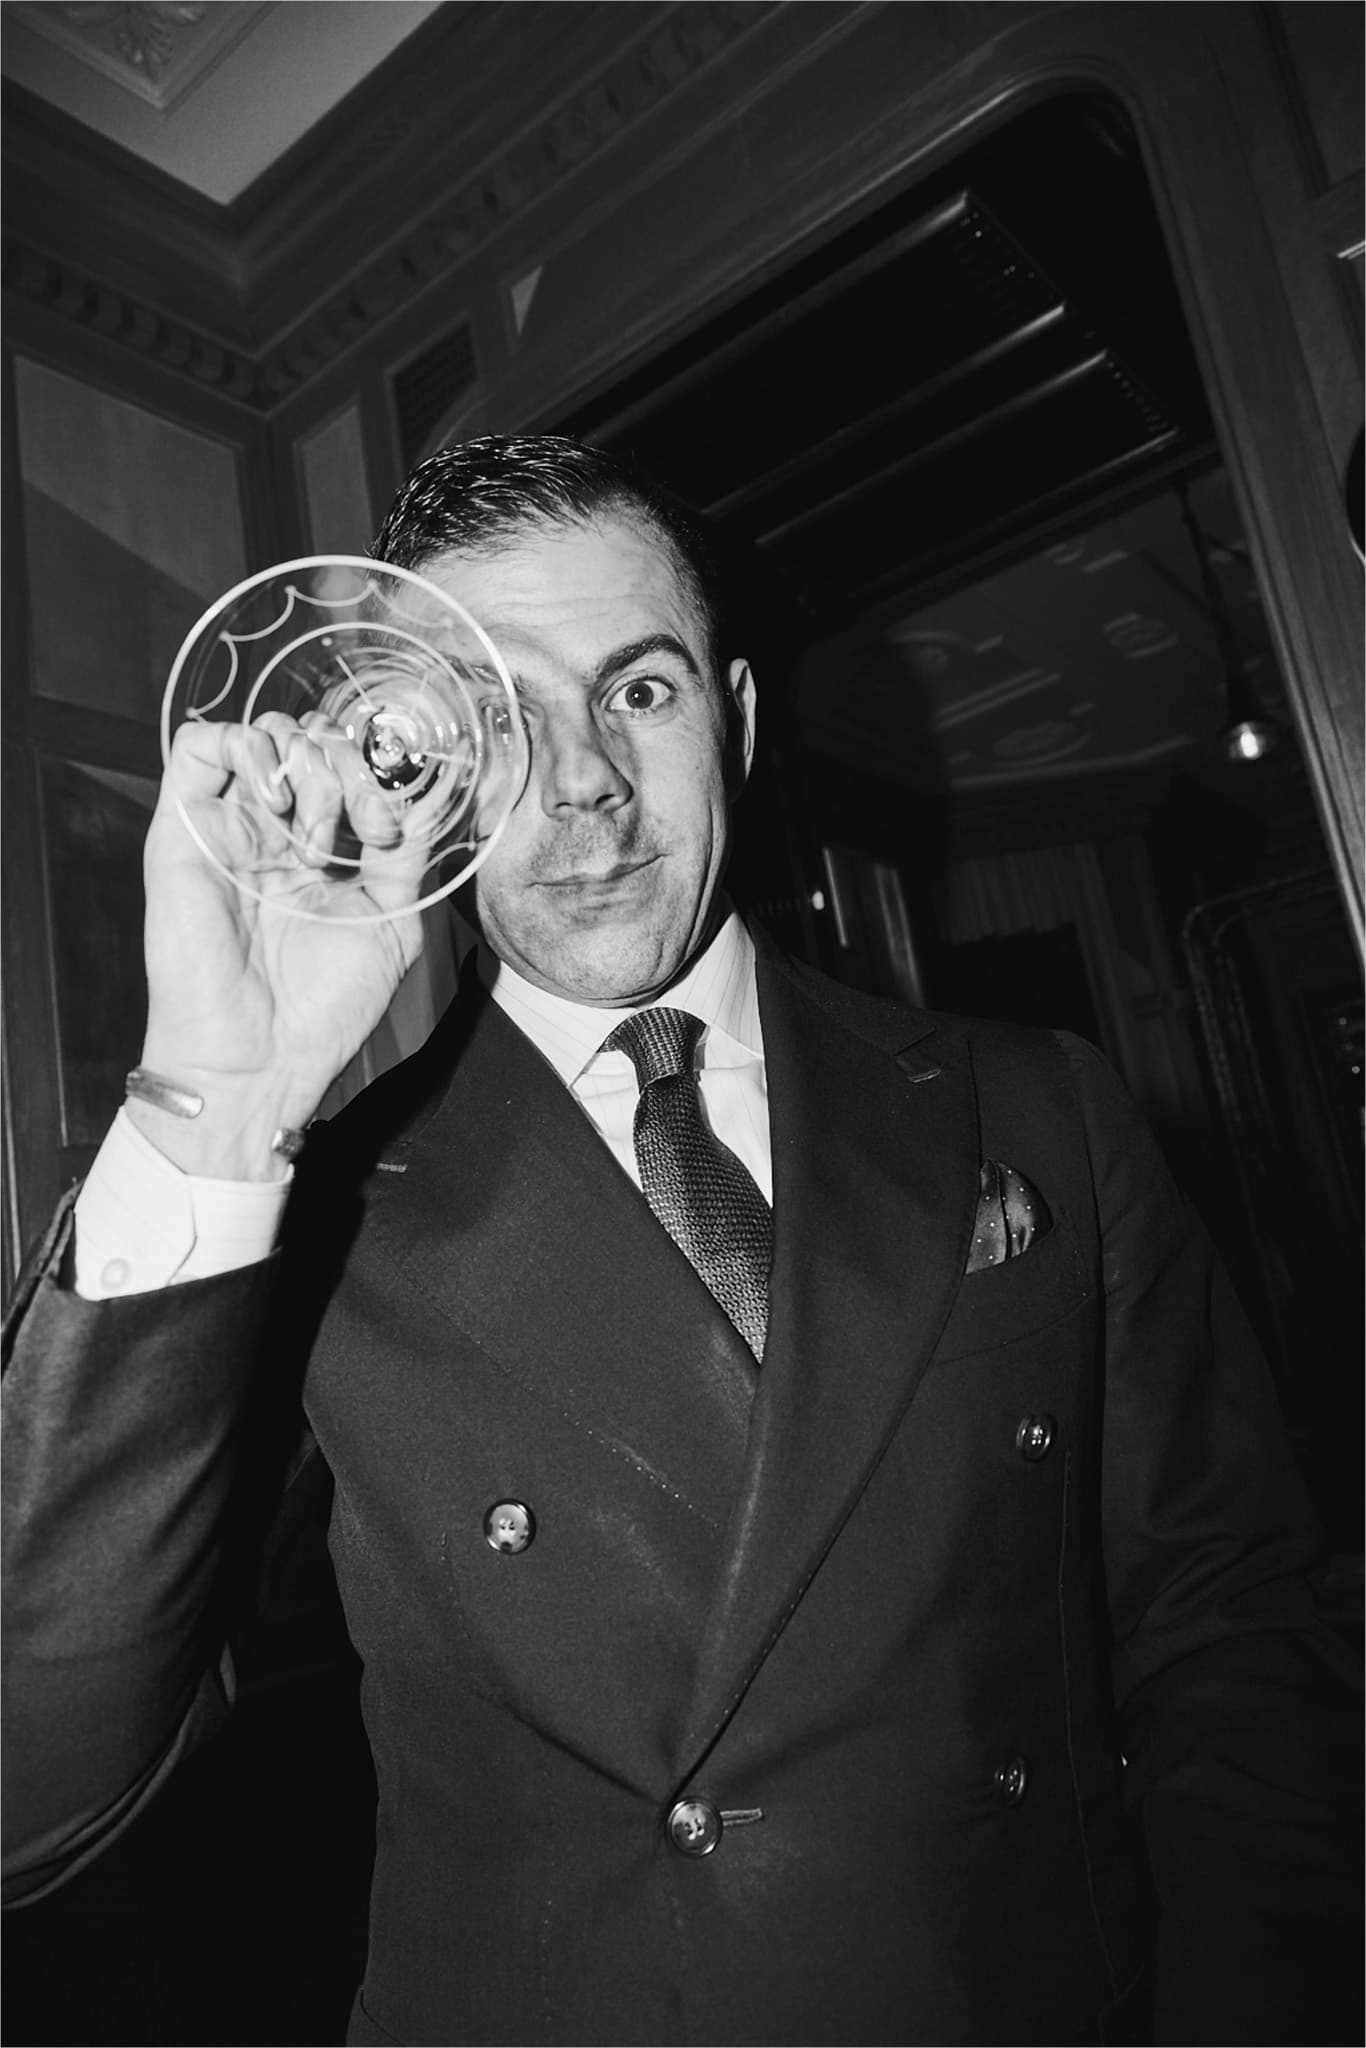 Ago Perrone with a martini glass up to his right eye.